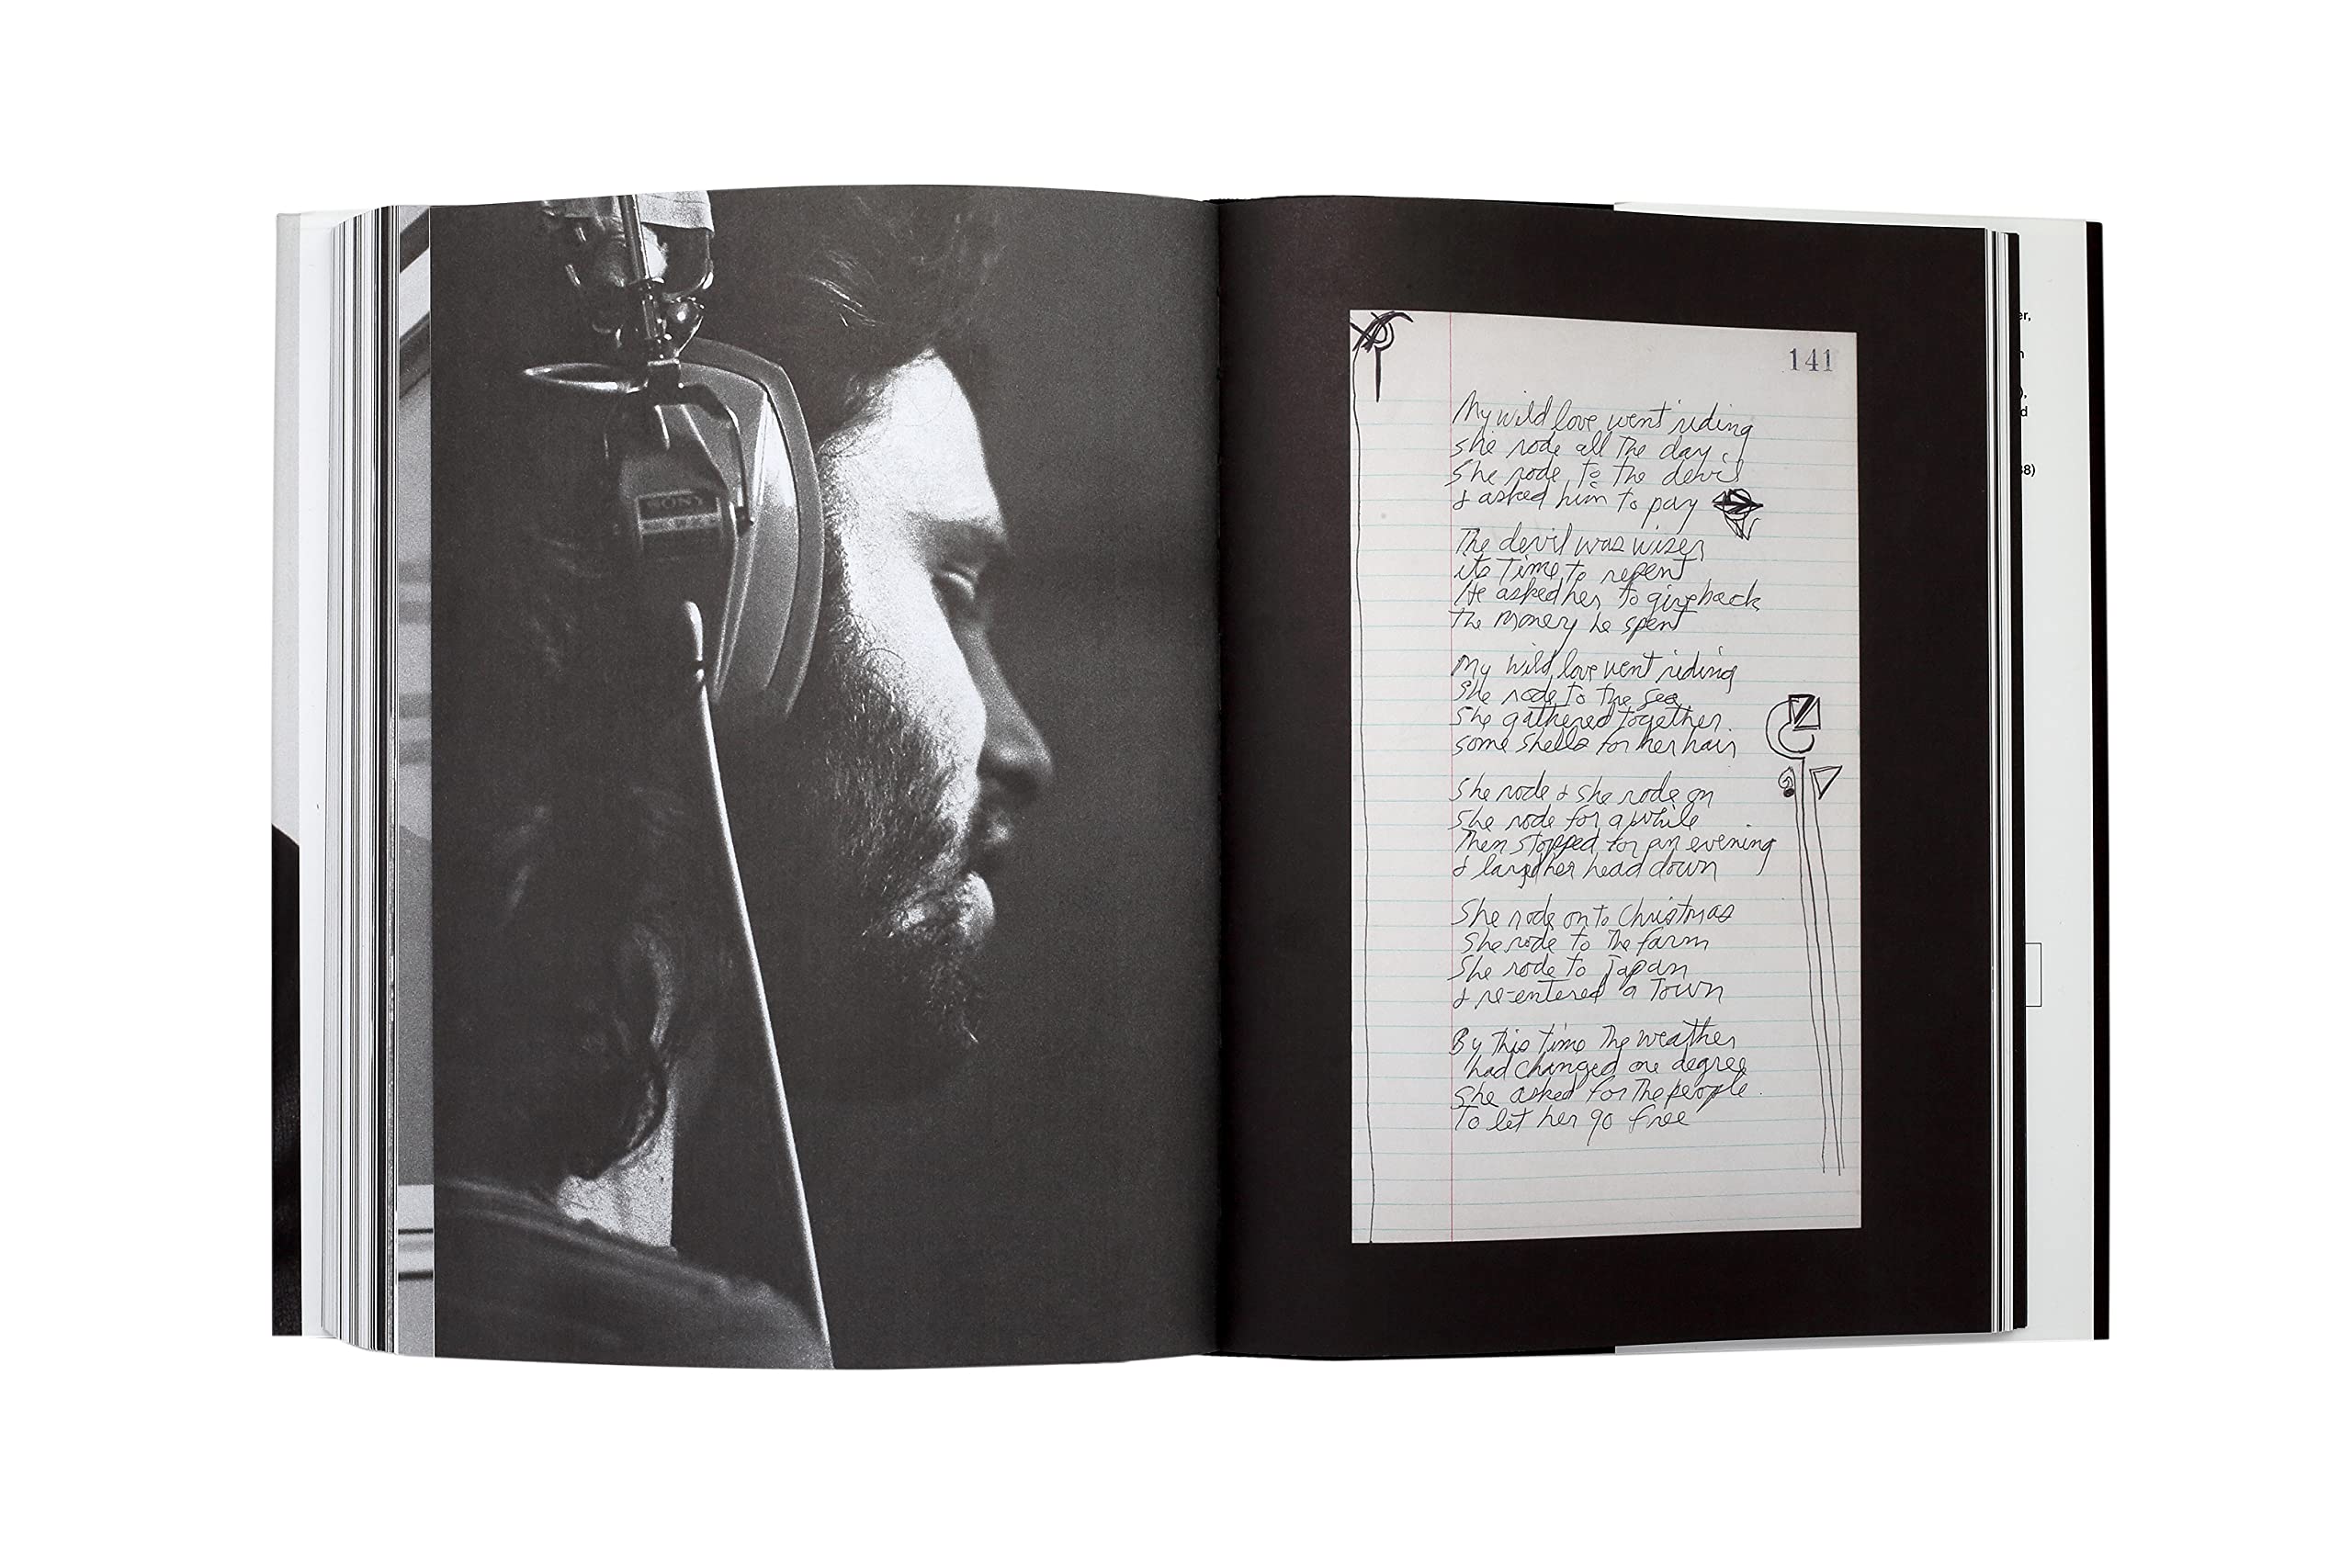 The Collected Works of Jim Morrison: Poetry, Journals, Transcripts, and Lyrics